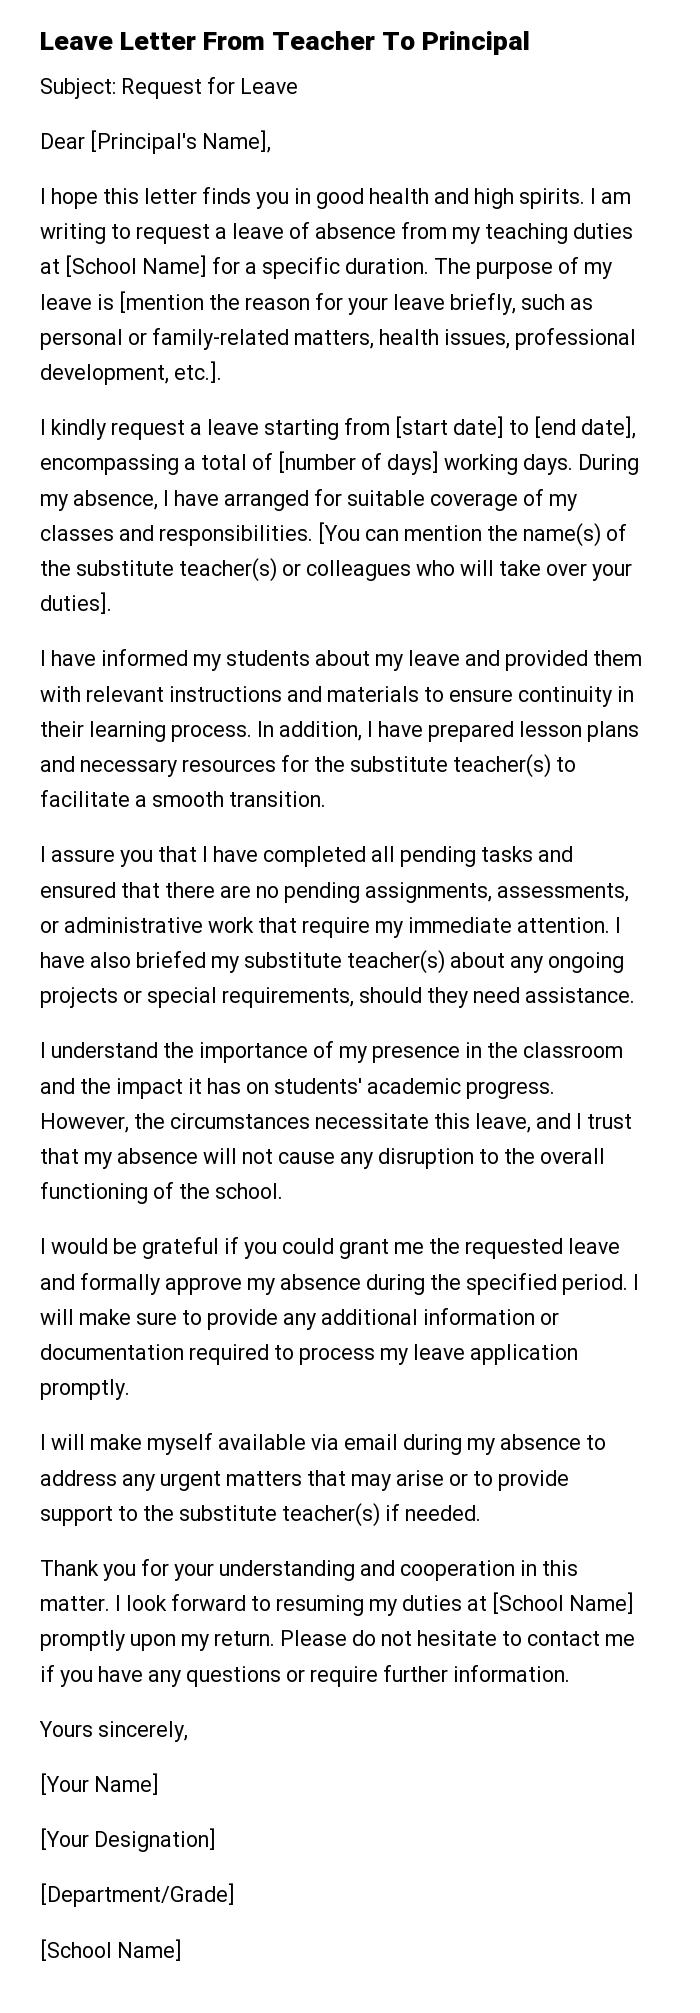 Leave Letter From Teacher To Principal